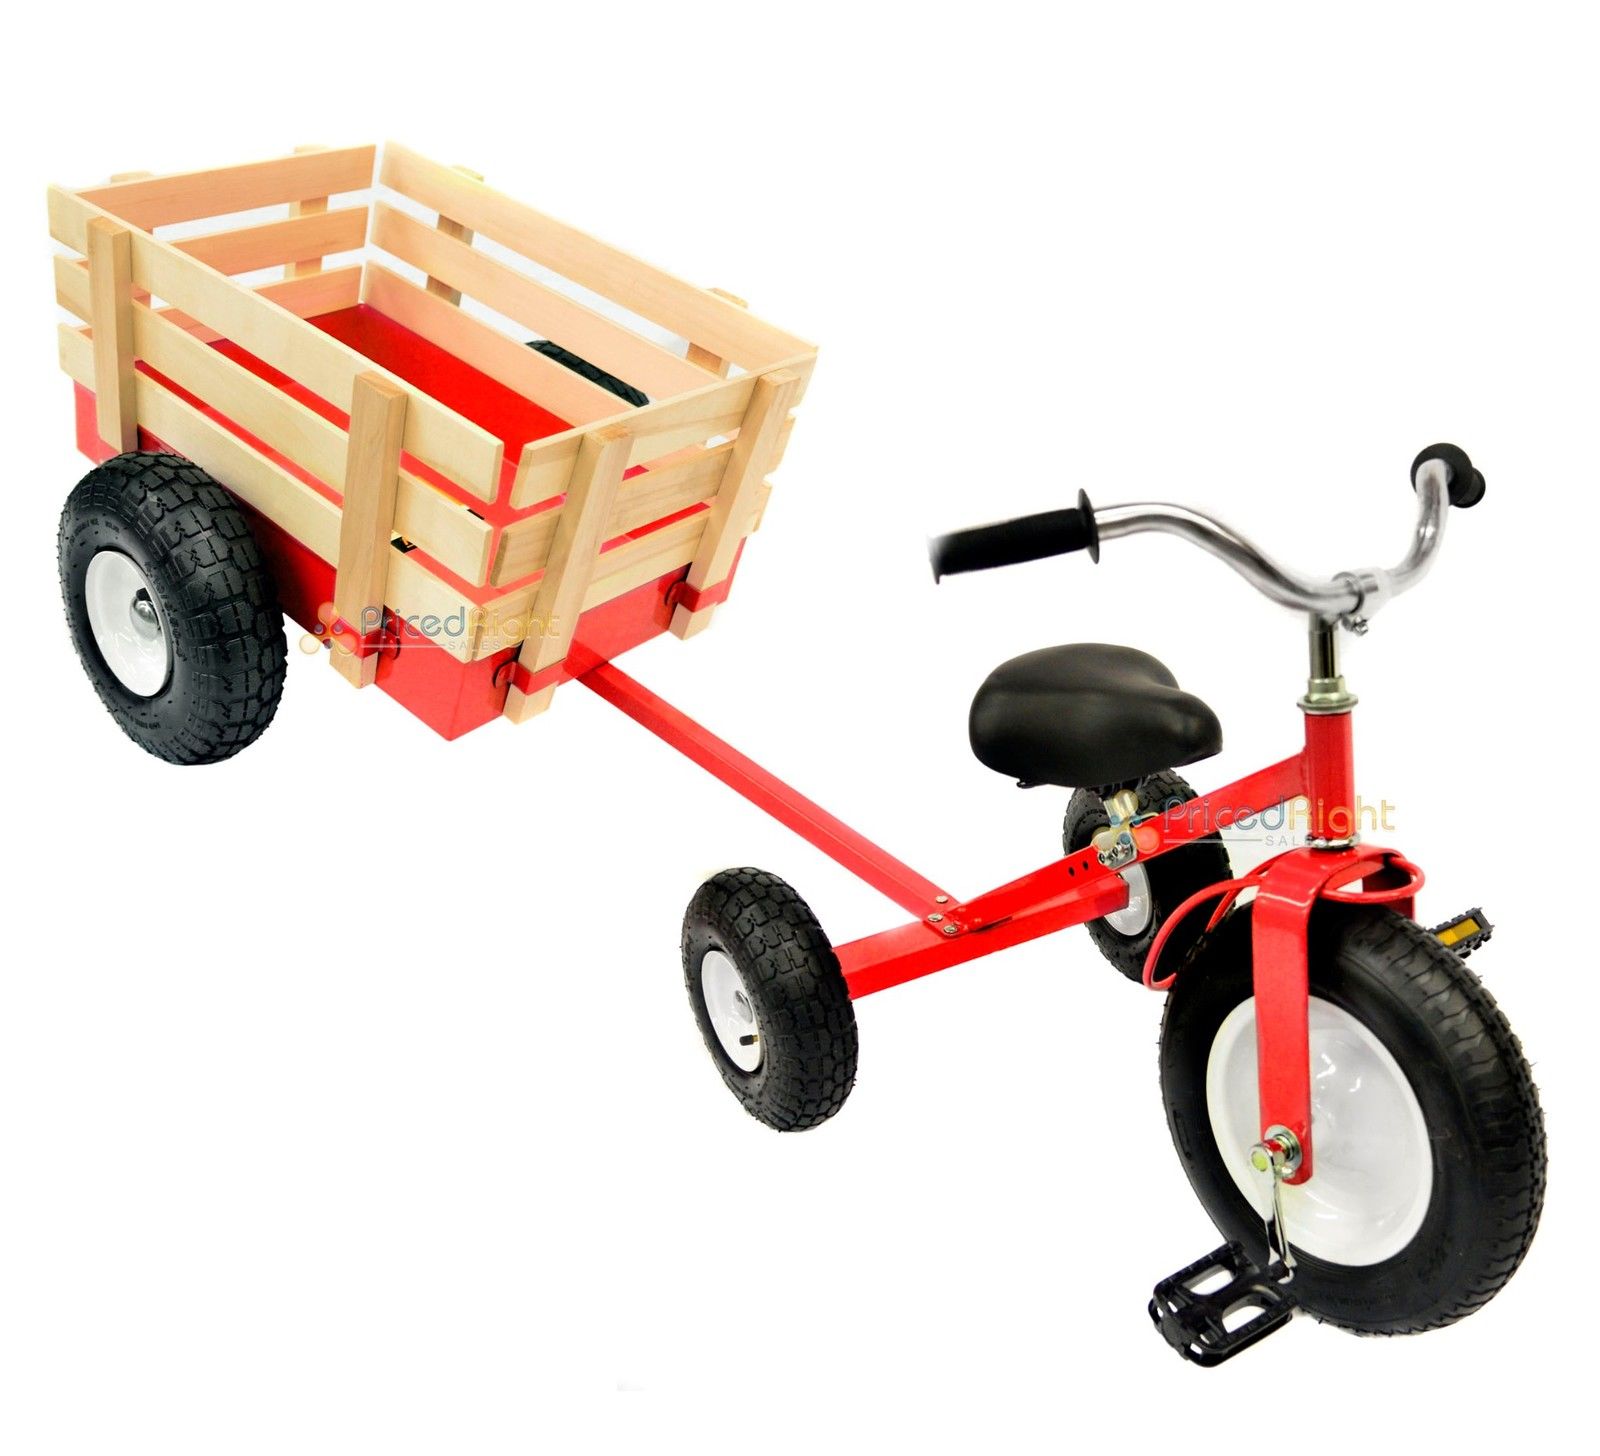 All Terrain Red Tricycle with Wagon Trike Set Pull Along Toy Outdoors Kids Pedal